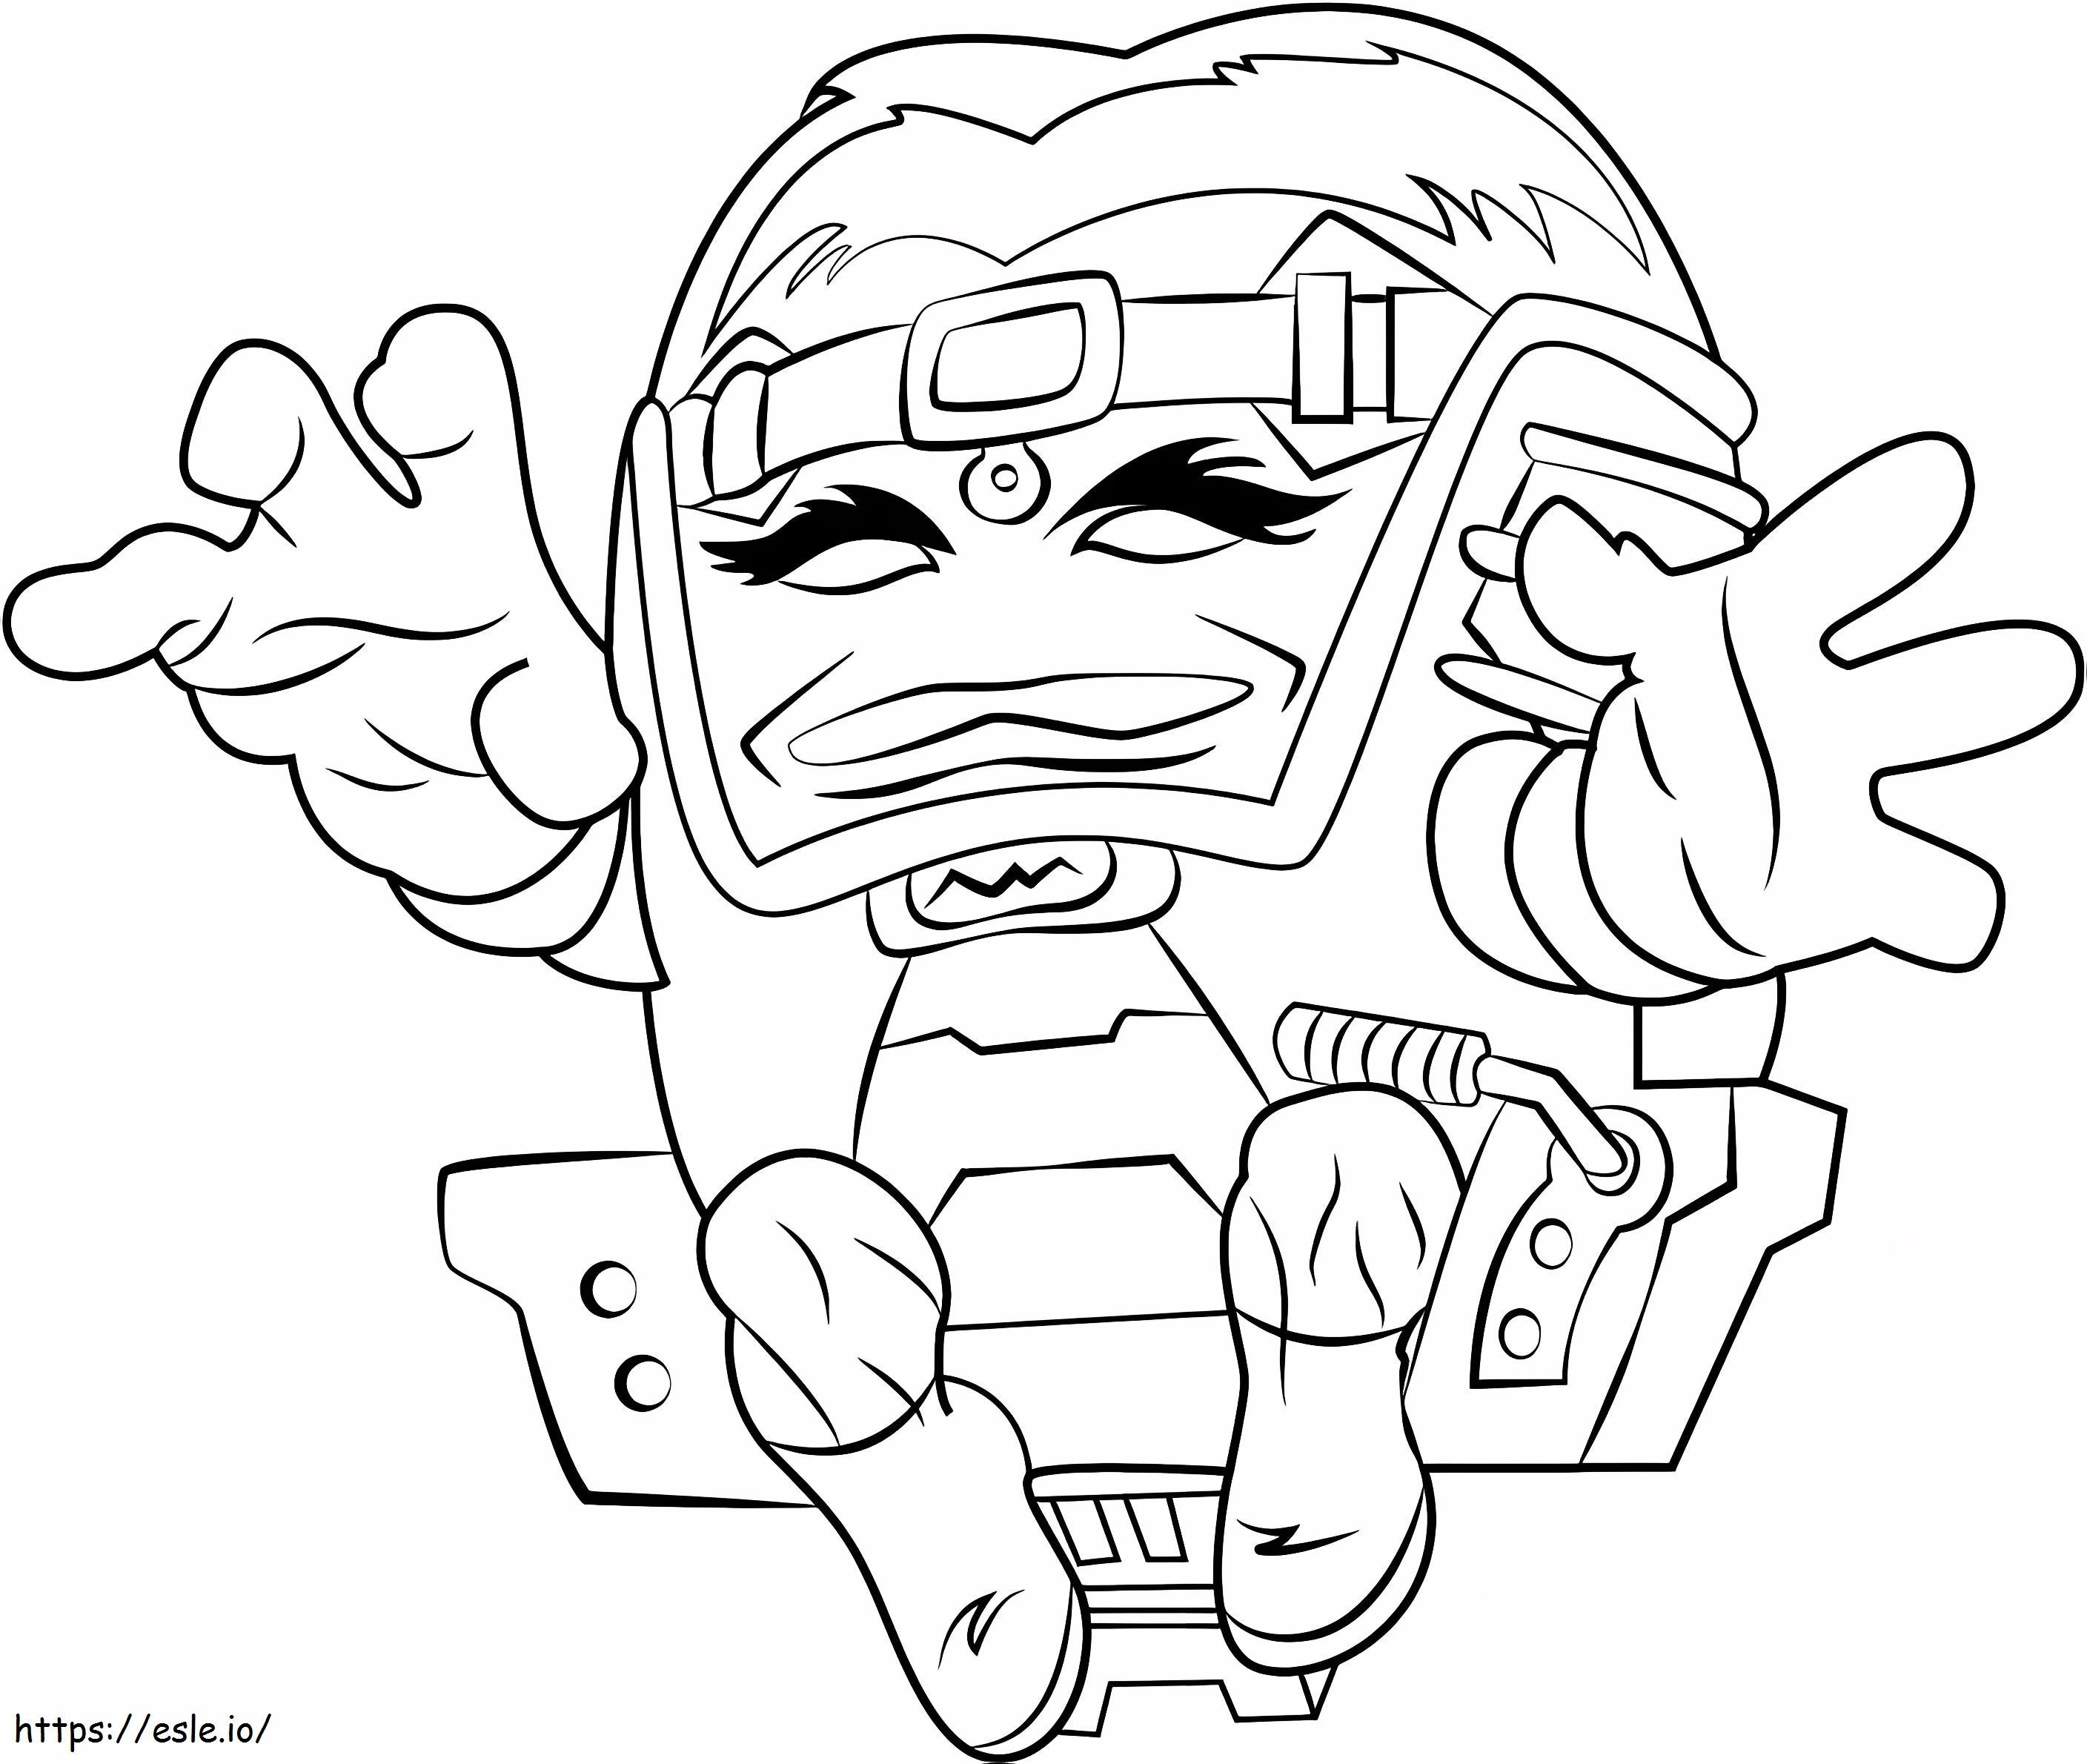 1532057057 Modok Flying A4 coloring page